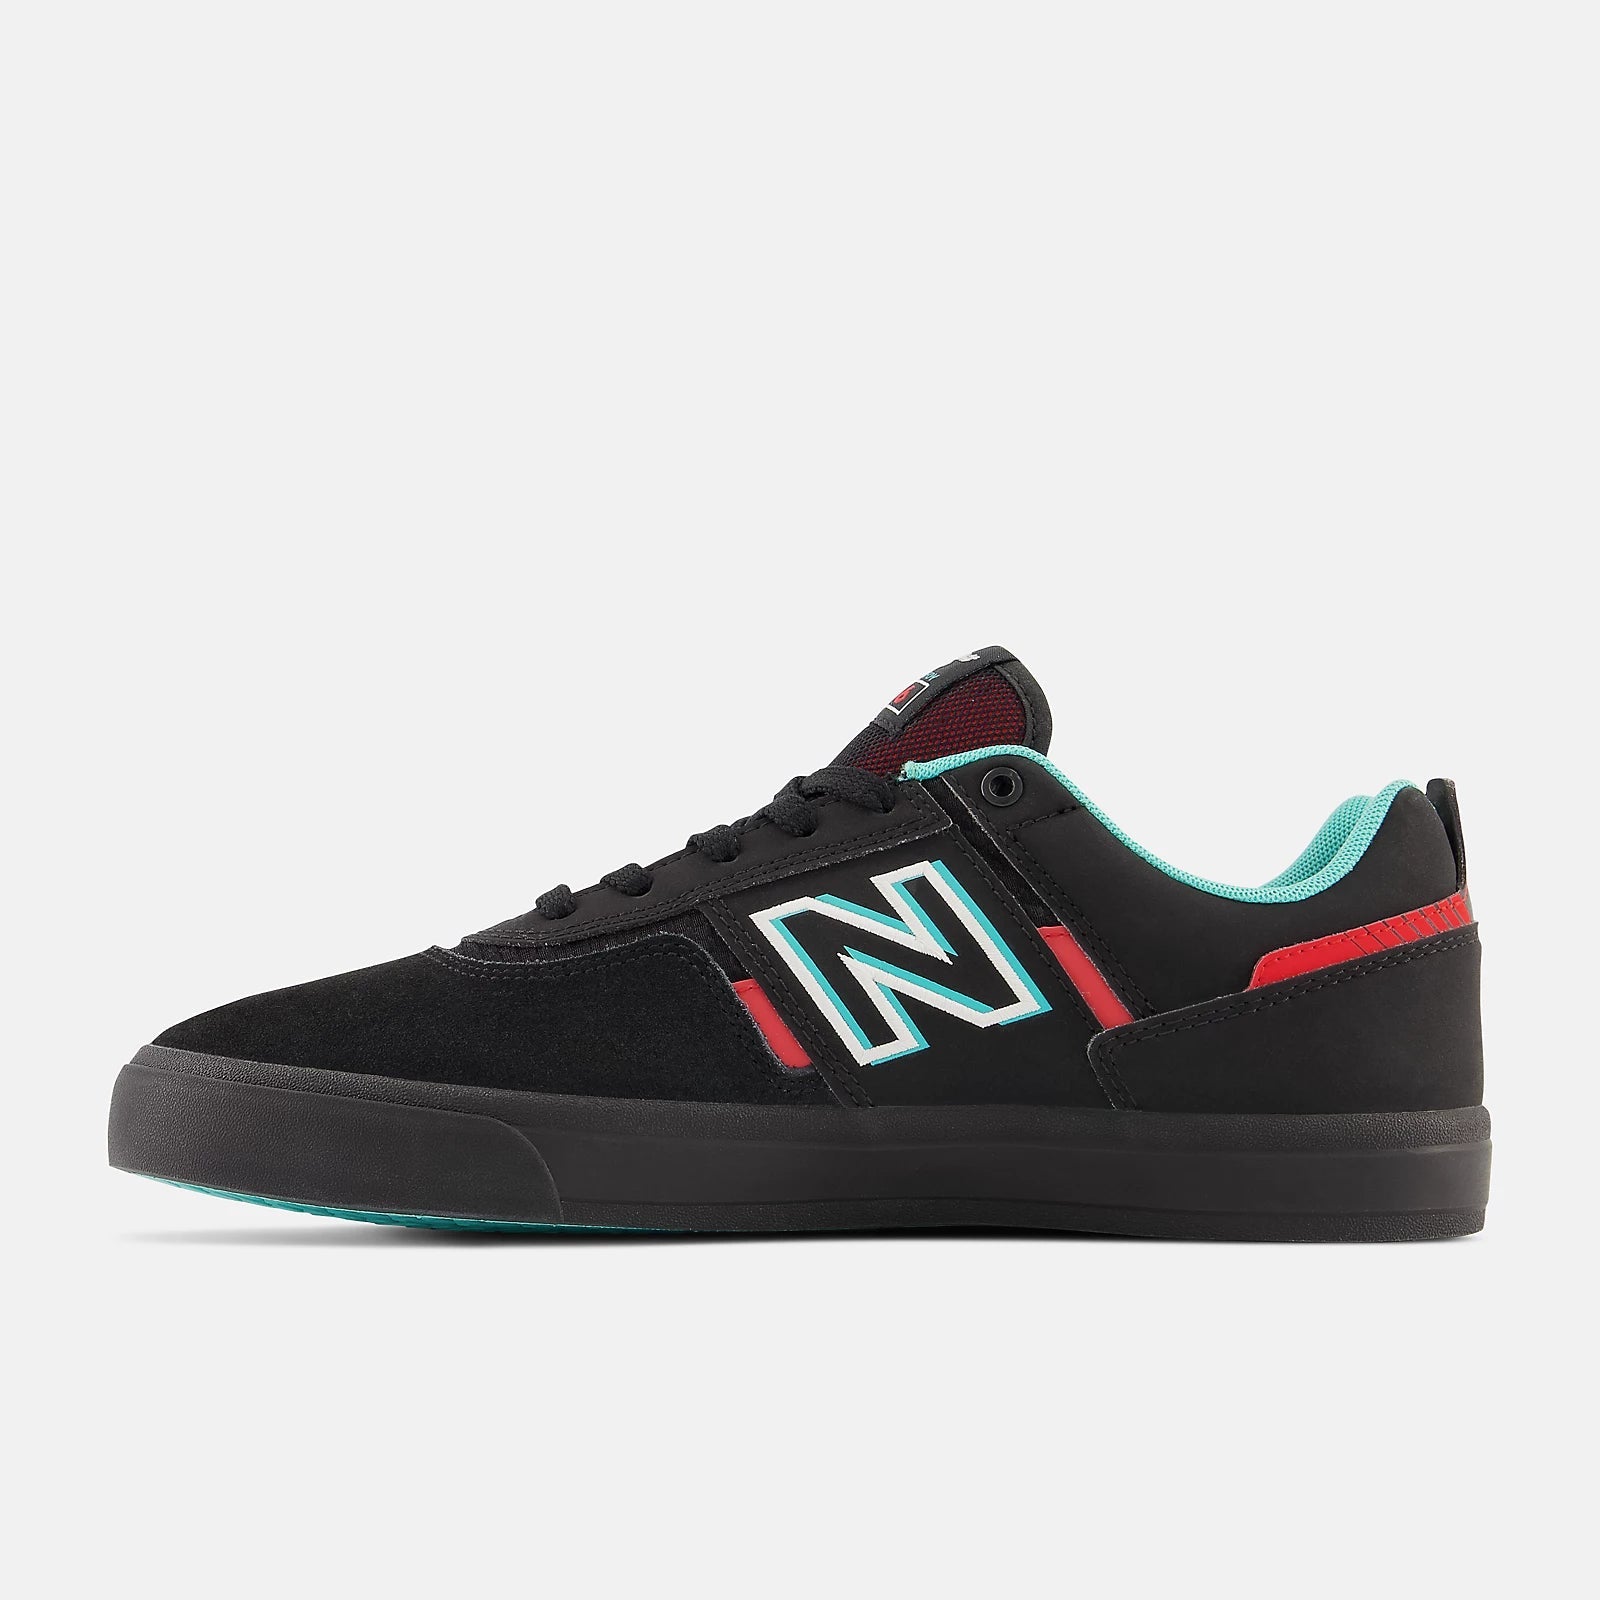 NB NUMERIC Jamie Foy 306 Shoes Black/Electric Red Men's Skate Shoes New Balance 